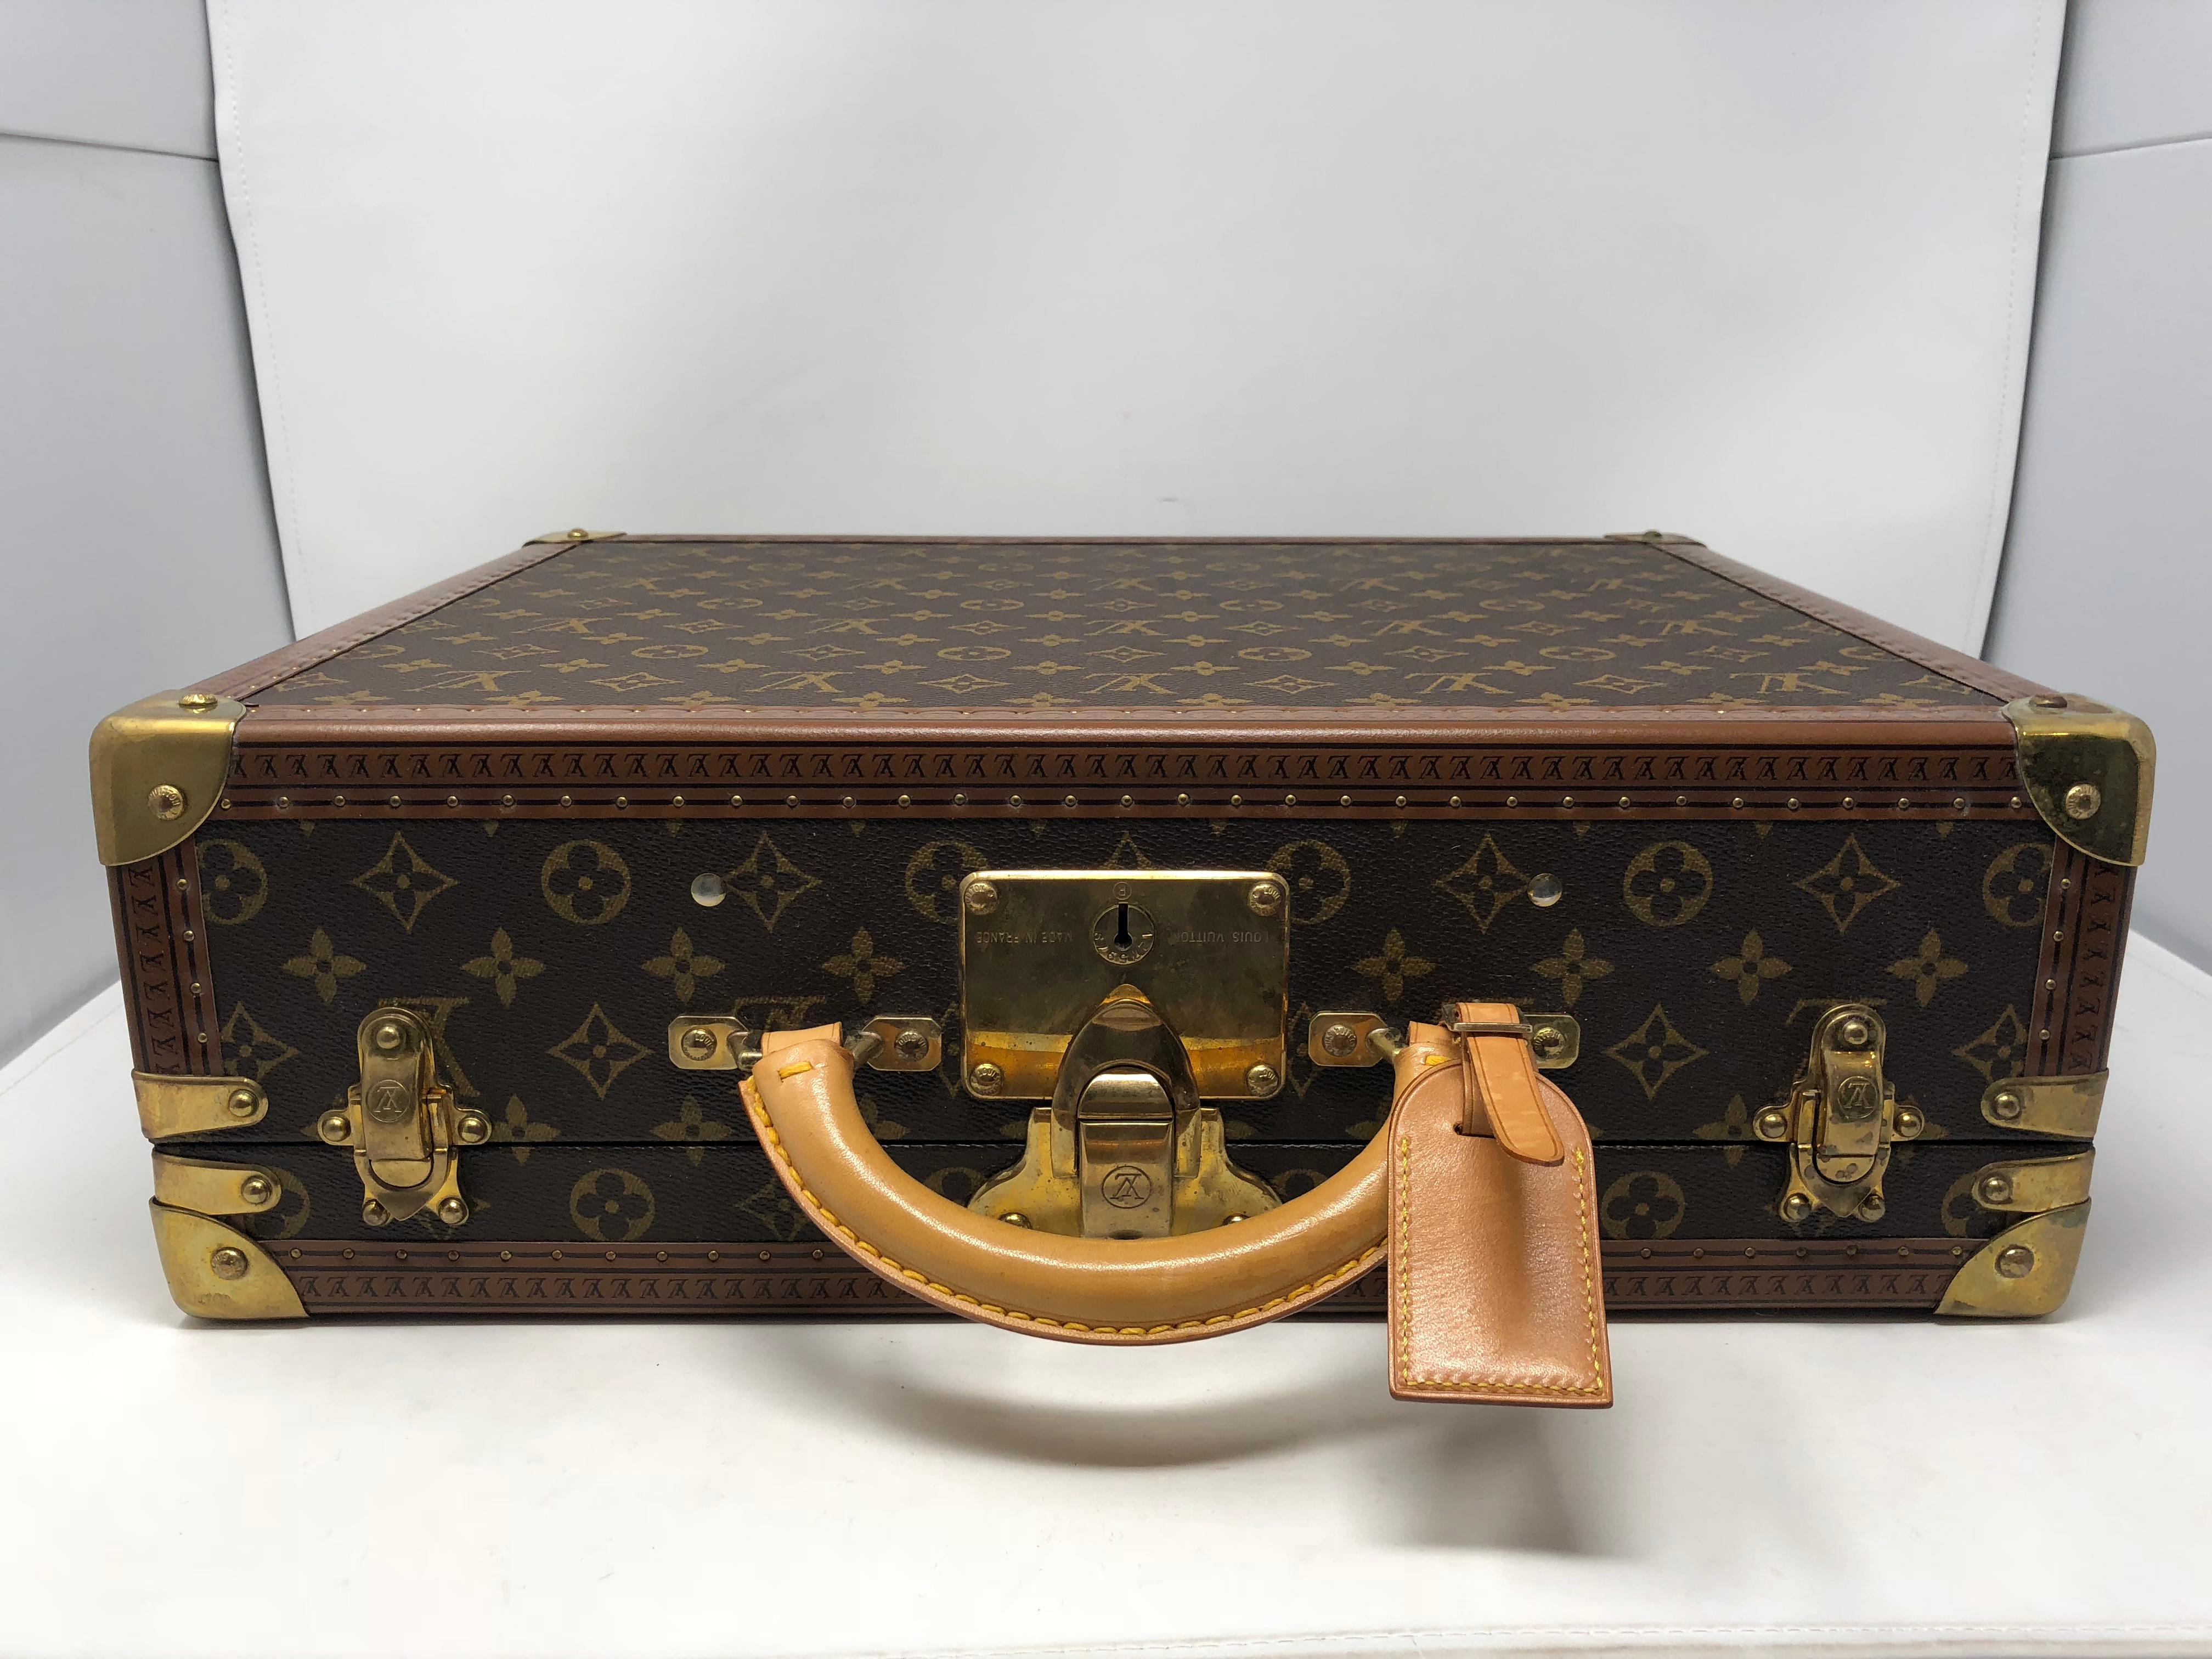 Louis Vuitton Cotteville 45 hard sided suitcase or briefcase. The little brother of the Alzer and Bisten, this case has generous room for all your essentials. Interior is like new and exterior has light wear. Great overall condition. This is a